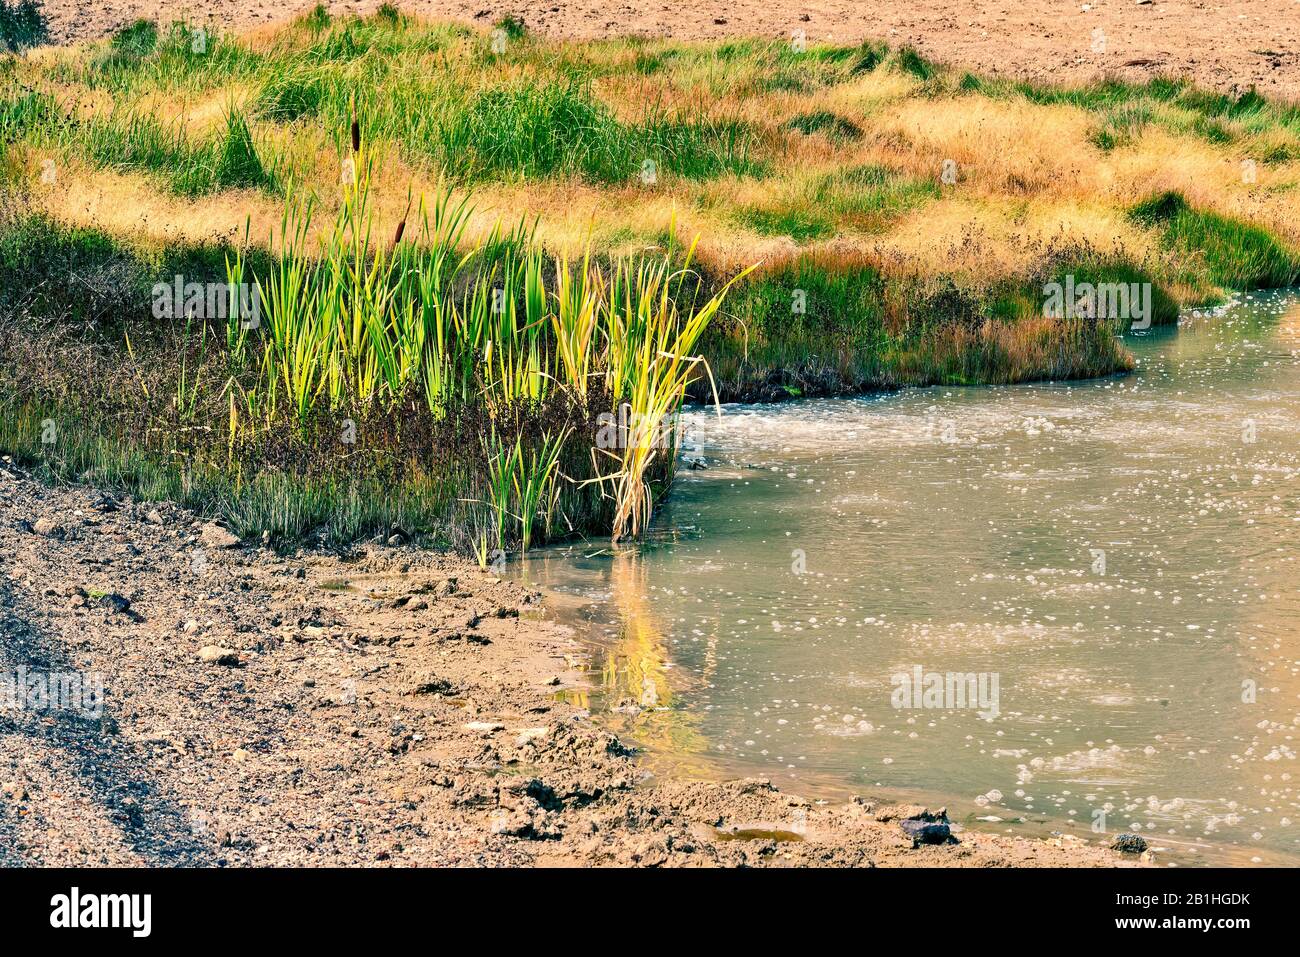 Muddy bubbling hot spring with green grass and field nearby. Stock Photo